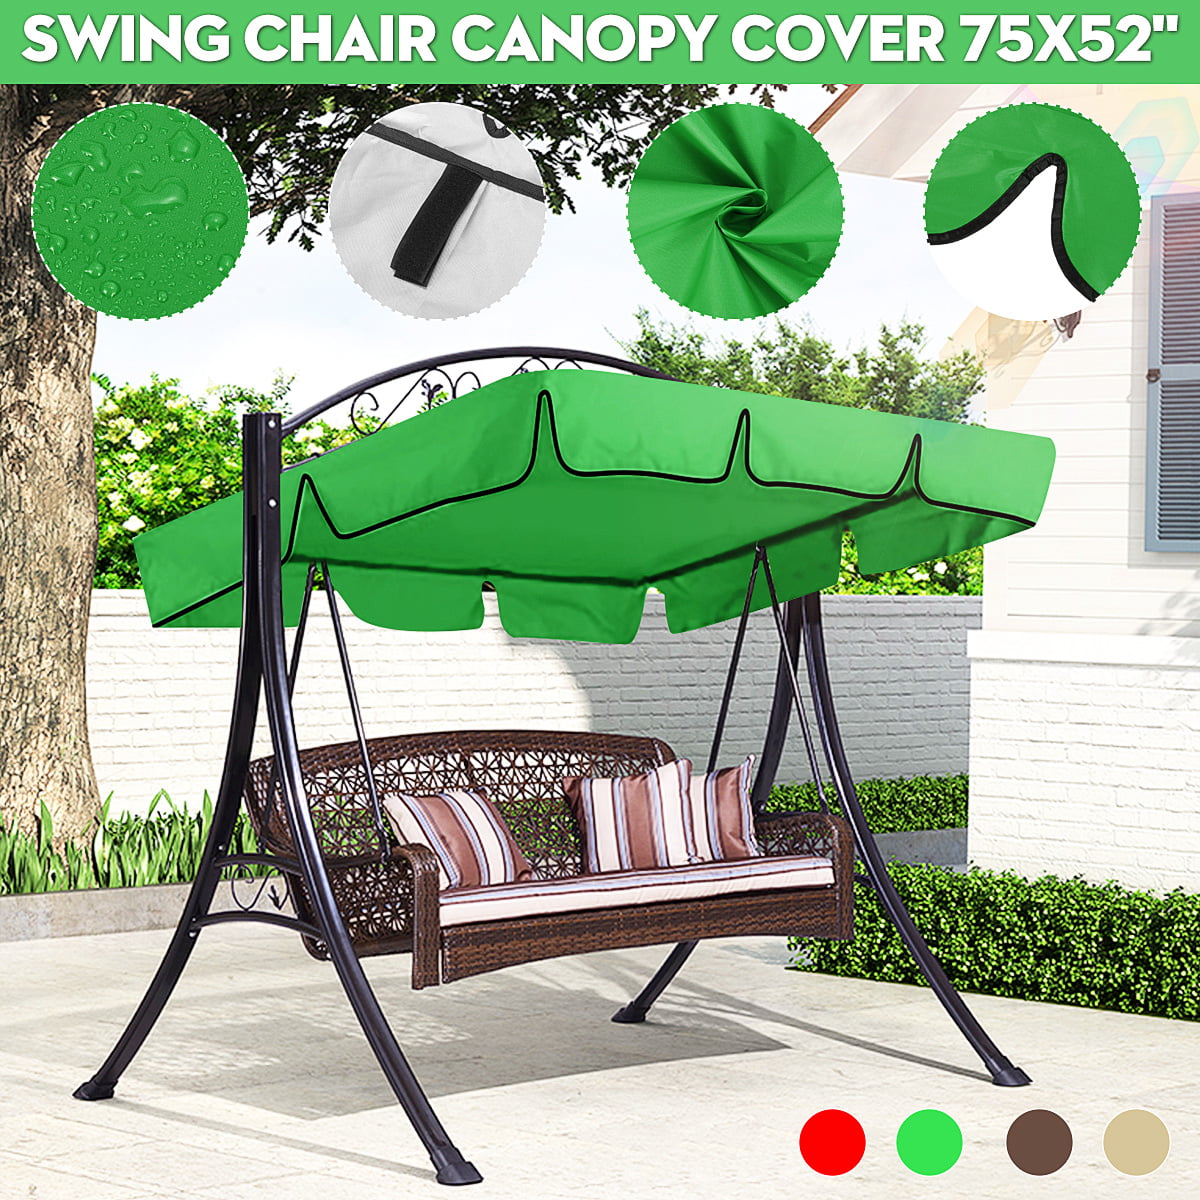 US 2&3 Seater Sizes Spare Cover Replacement Canopy Swing Seat for Garden 